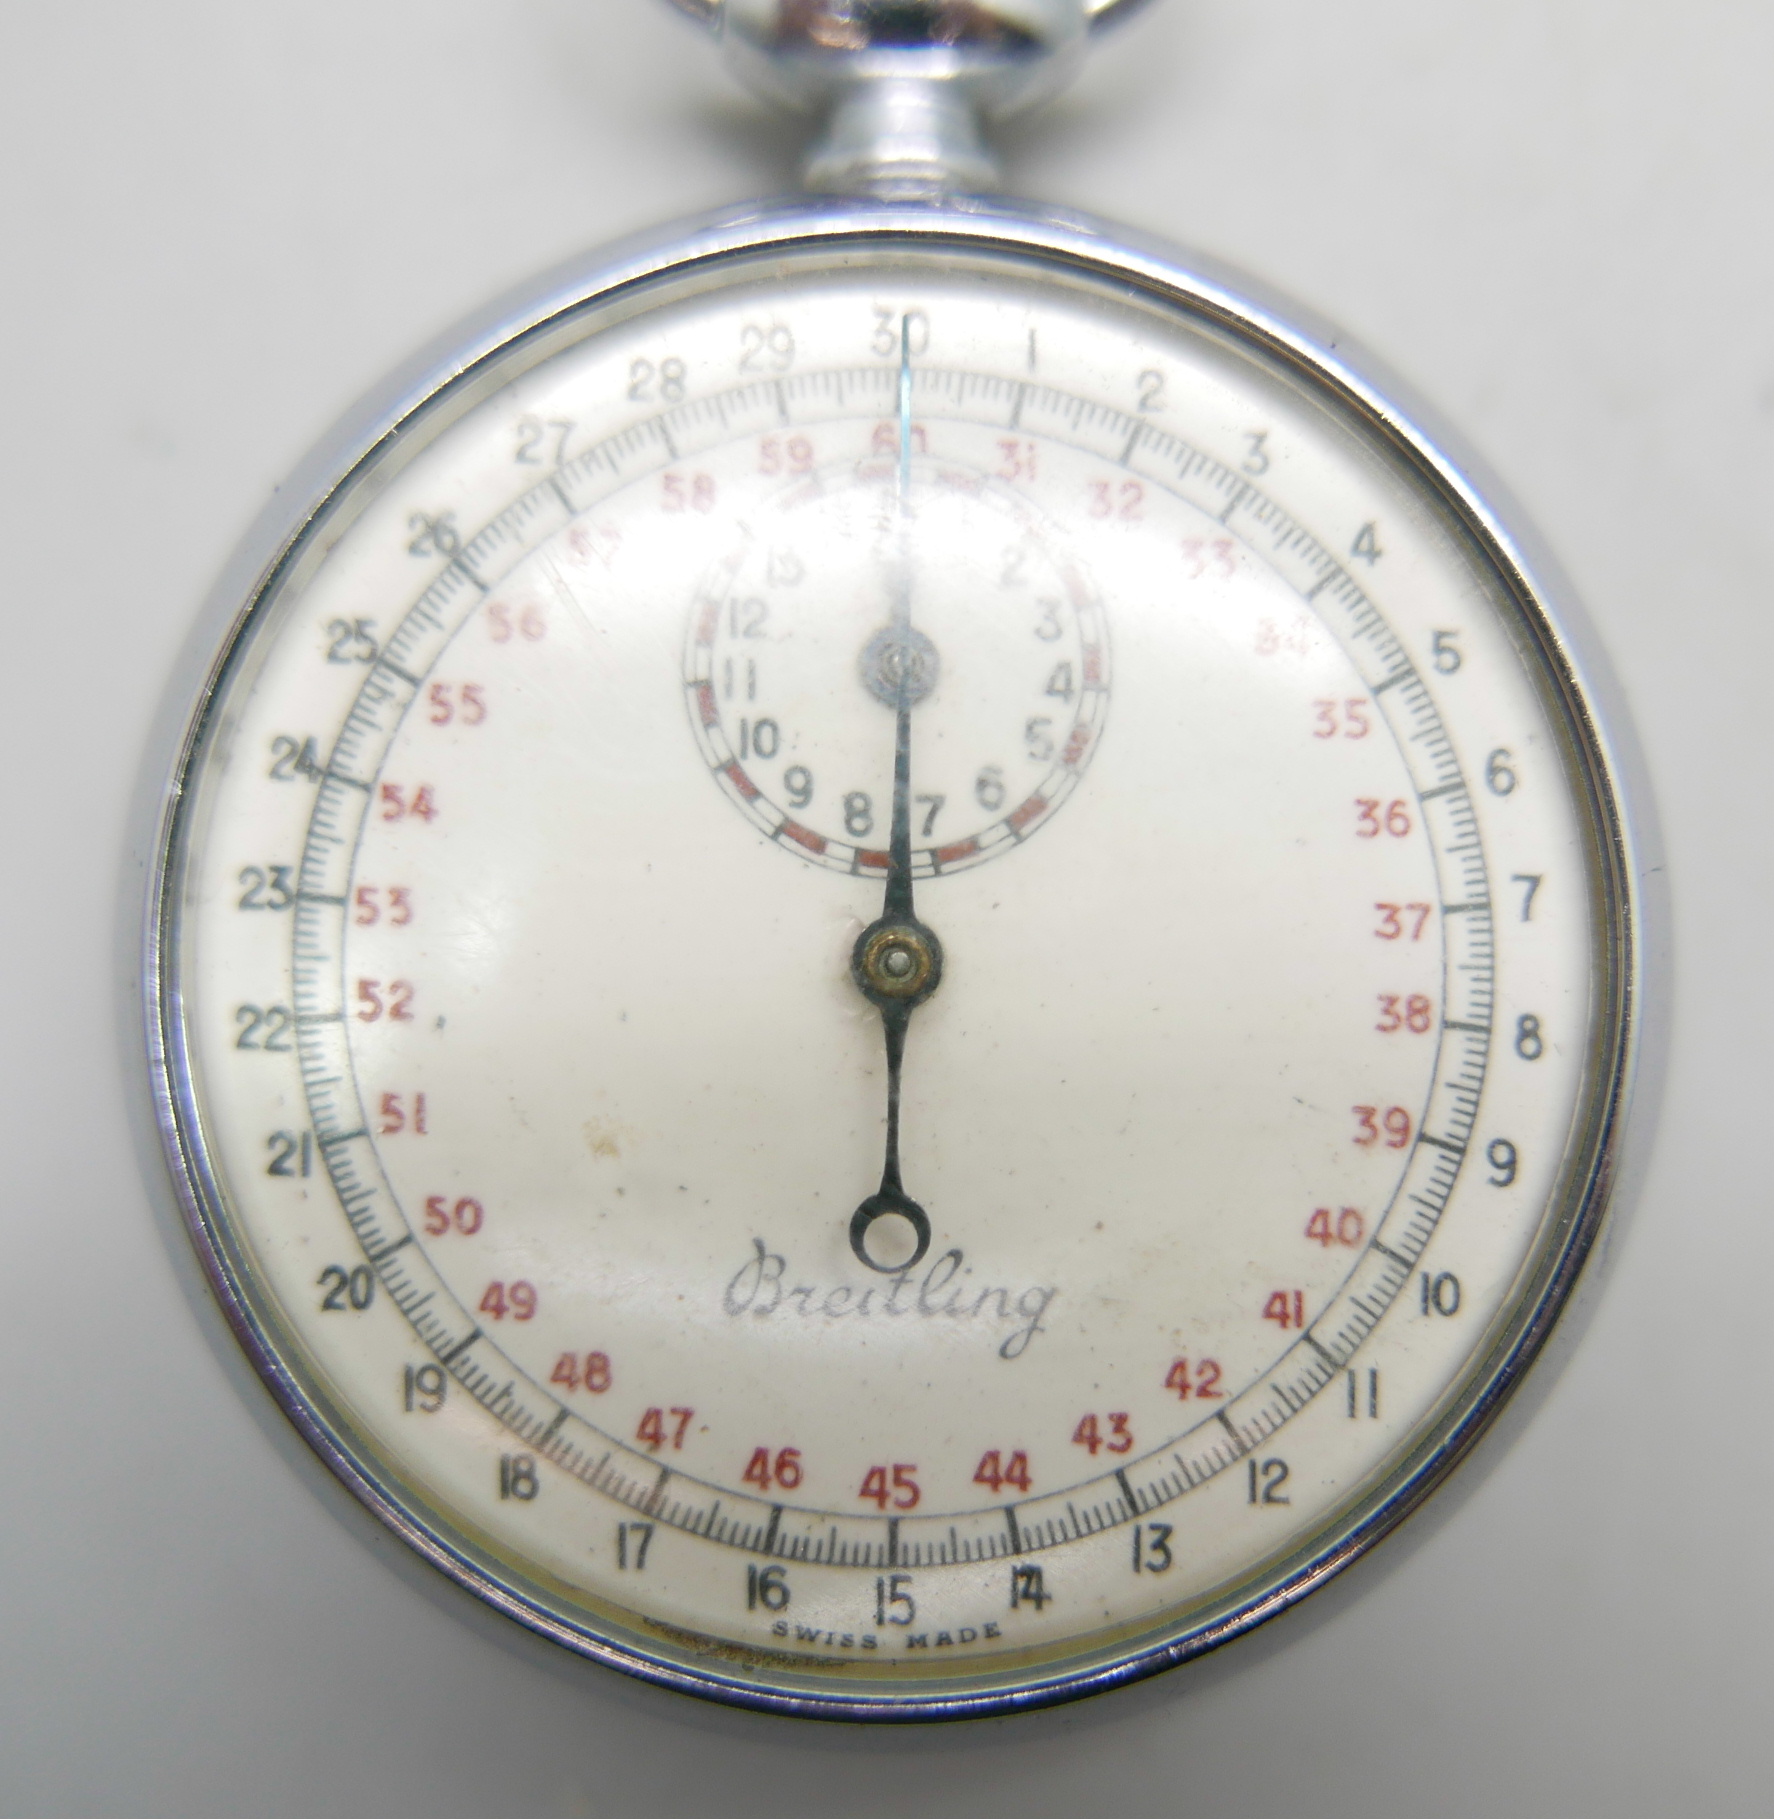 A Breitling stopwatch - Image 2 of 2